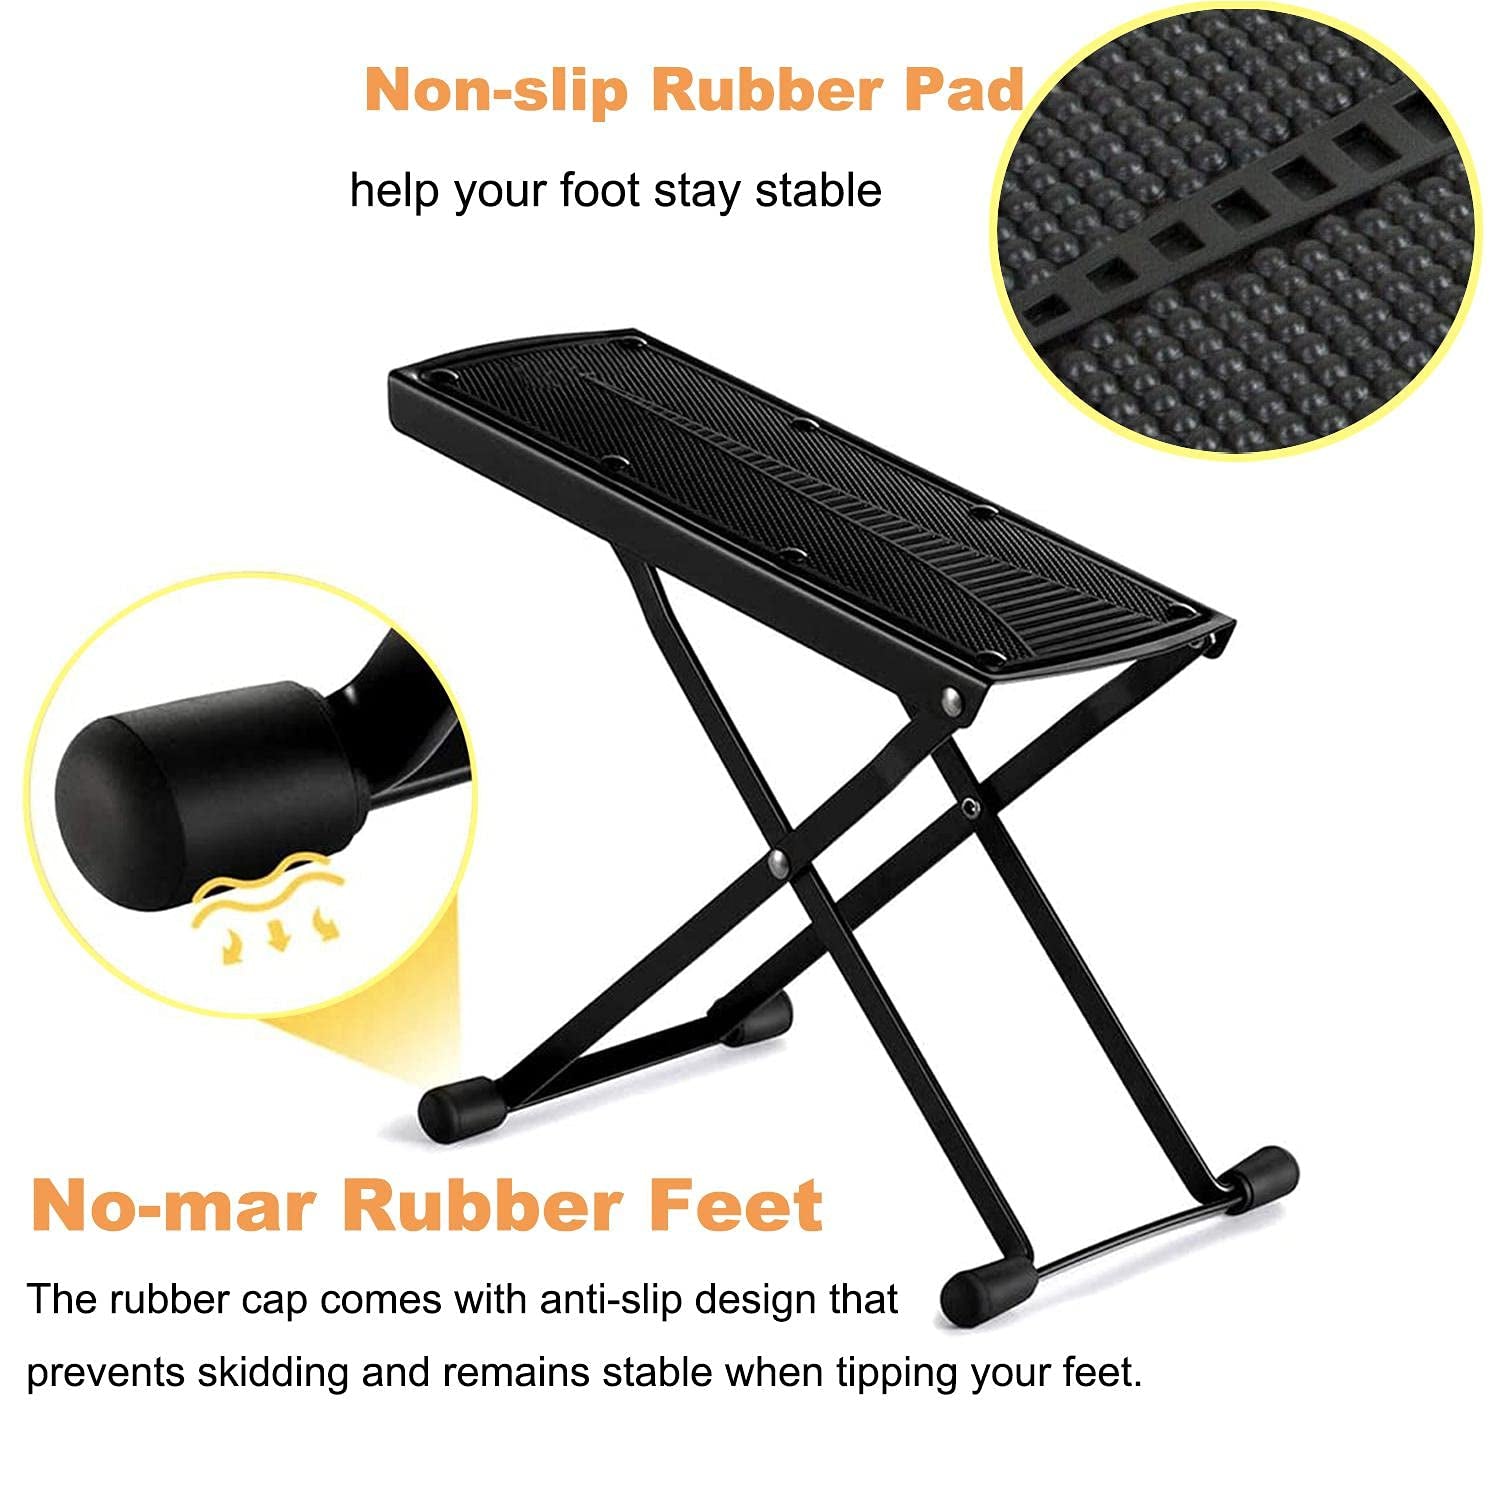 Pedicure Foot Rest, 6-Position Height Adjustable Salon Step Pedicure Stand,Non-Slip Sturdy Footrest for Easy-At Home Pedicures, No More Bending or Stretching.